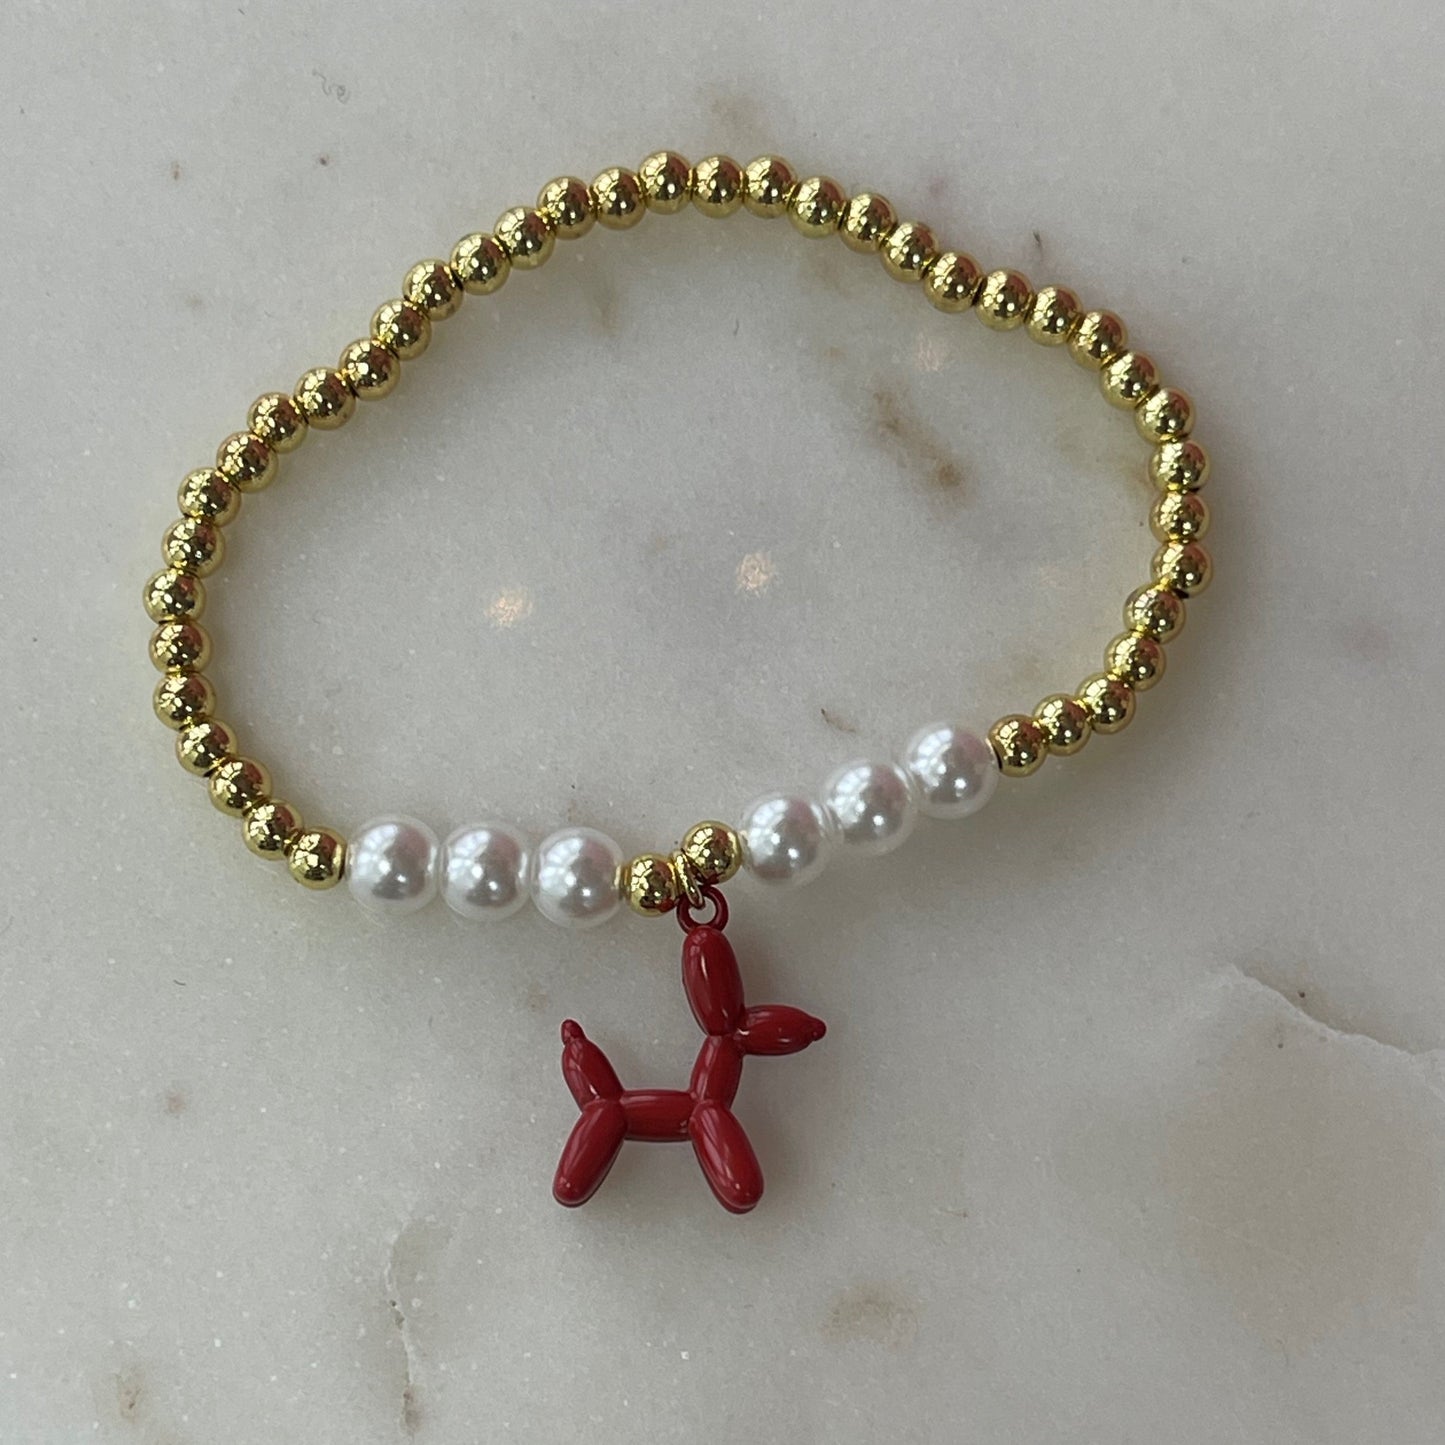 gold and pearl band bracelet with a red balloon shaped dog